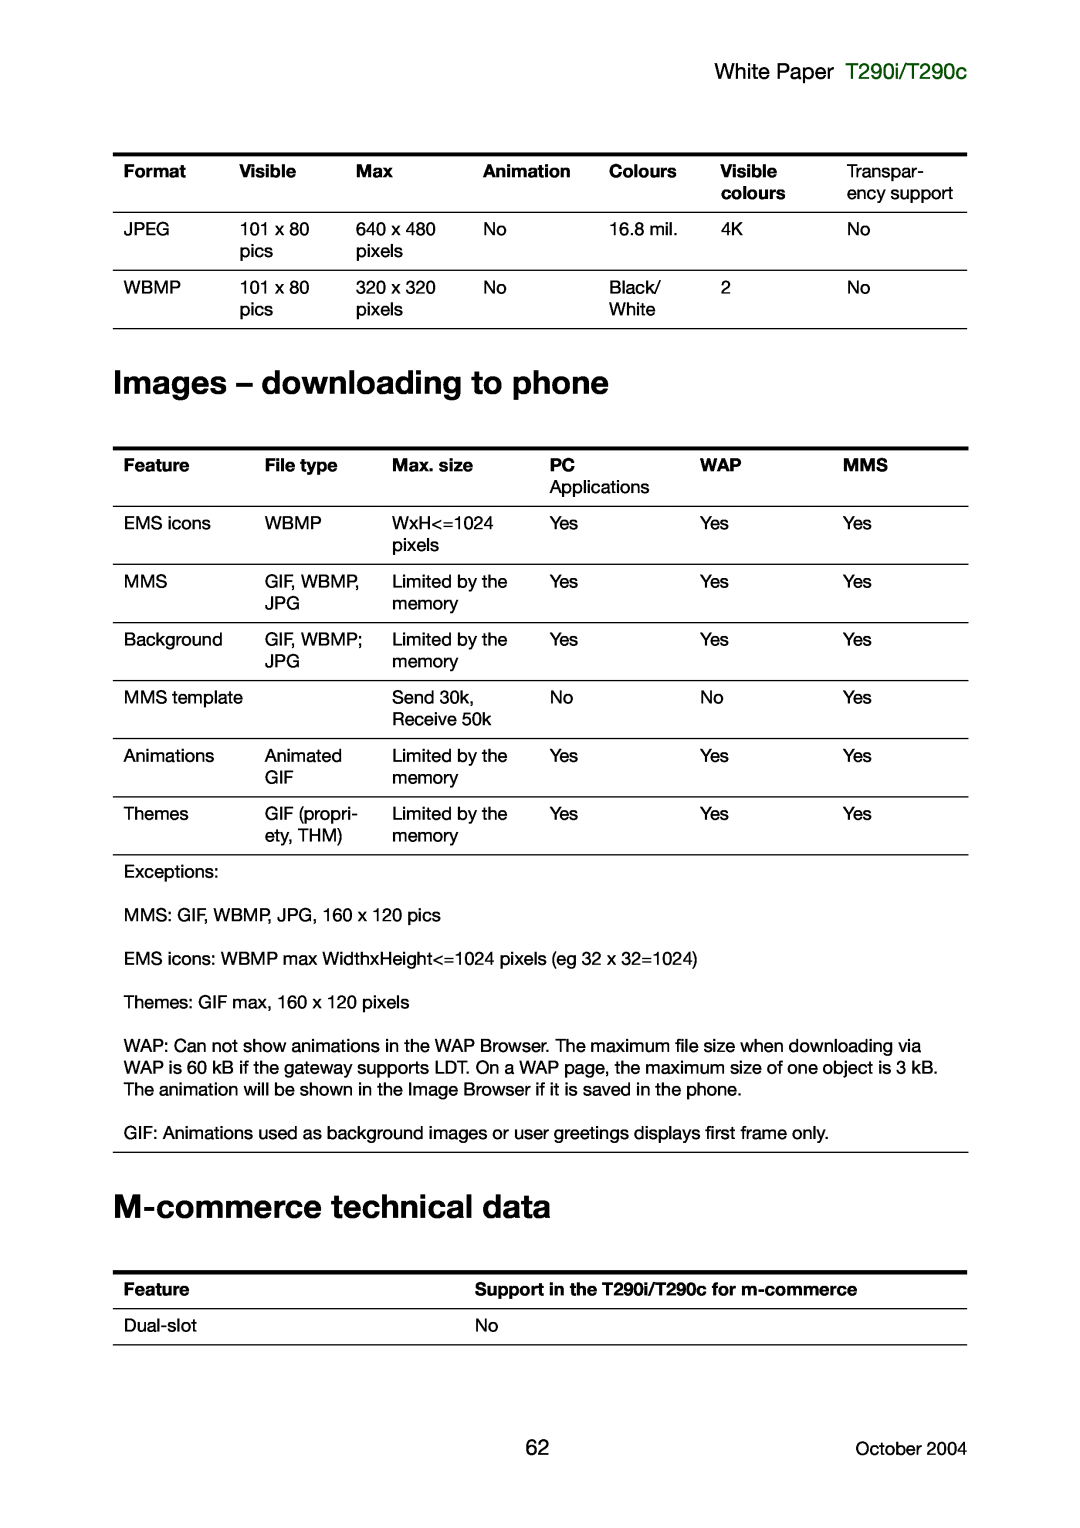 Sony Ericsson manual Images - downloading to phone, M-commerce technical data, White Paper T290i/T290c 